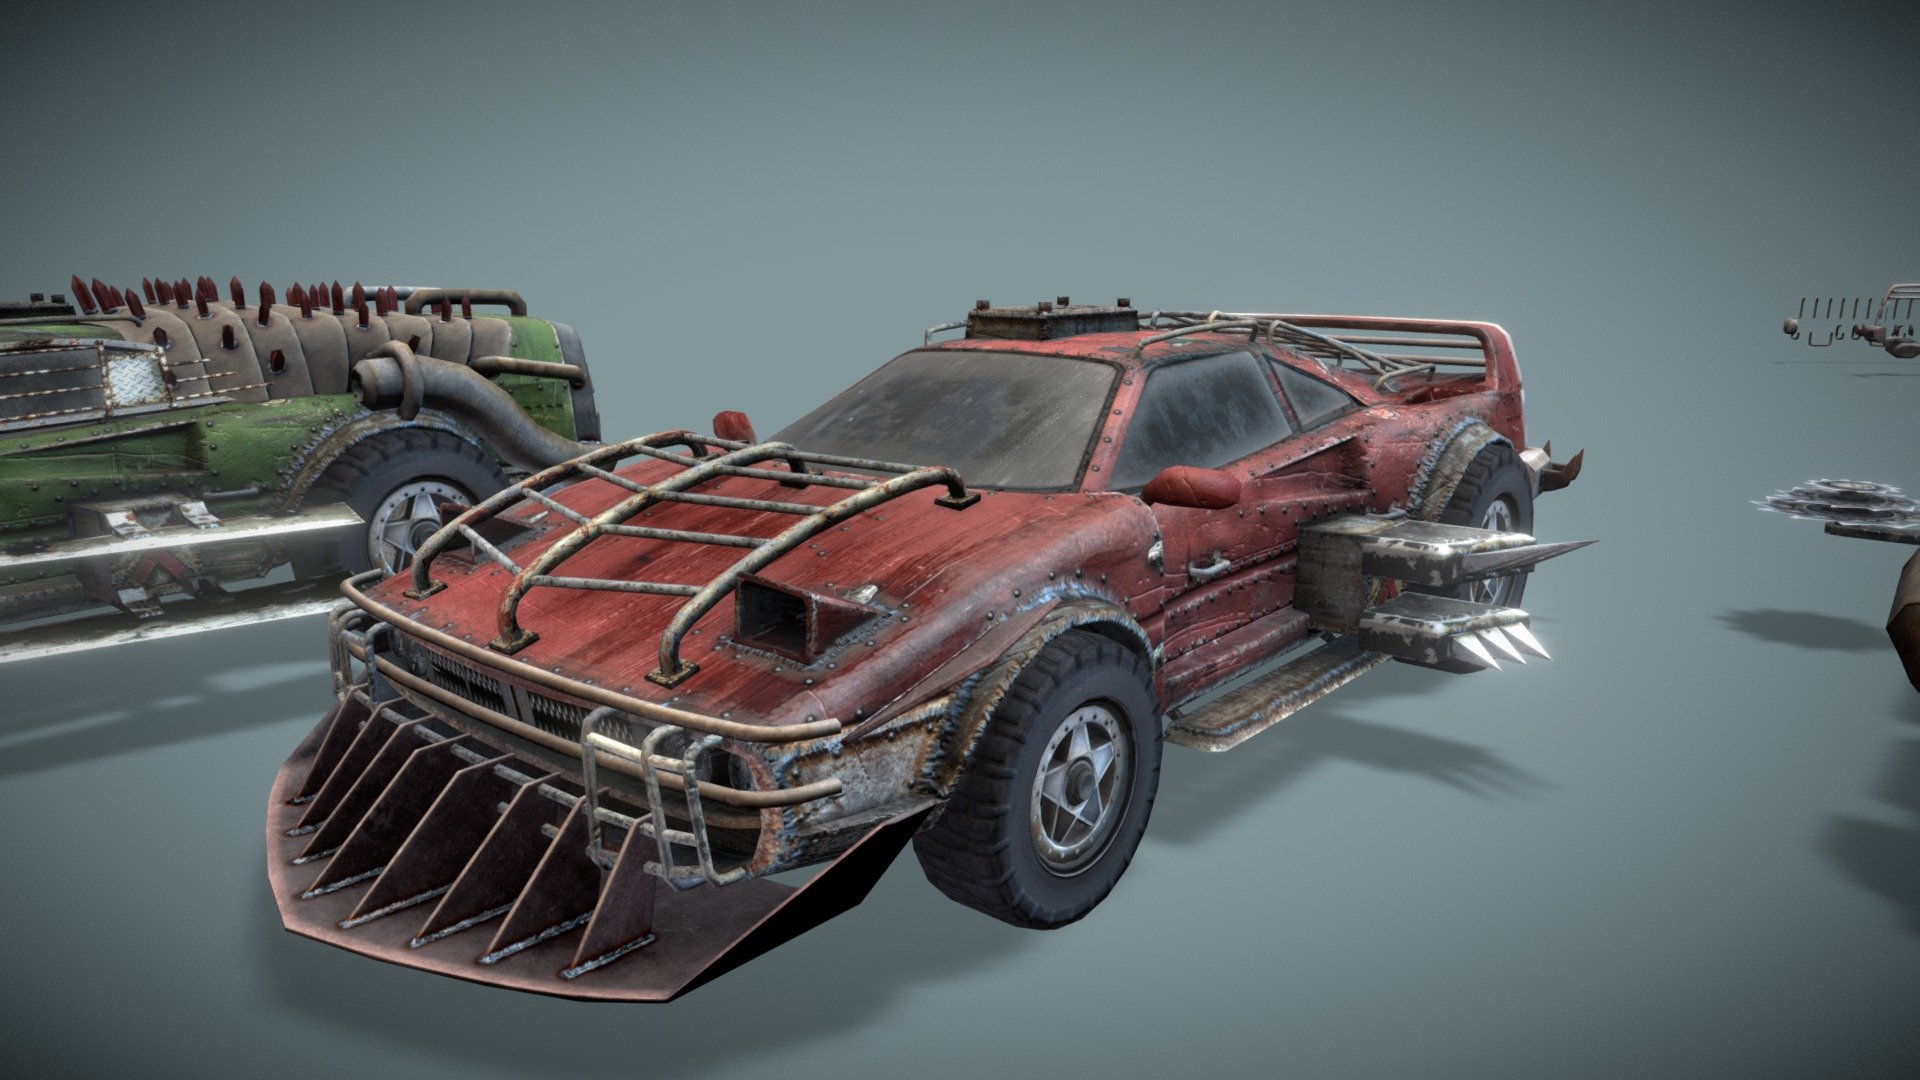 Lowpoly GameReady
parts:
-6 carpaints
-5 frontbumpers
-5 backbumpers
-3 sidekits
-5 hoods
-5 windshields

textures: 
color, specular, metallic, reflection, normal - Customizable Post-Apocalyptic car - Ferrari - 3D model by MadManStudio 3d model